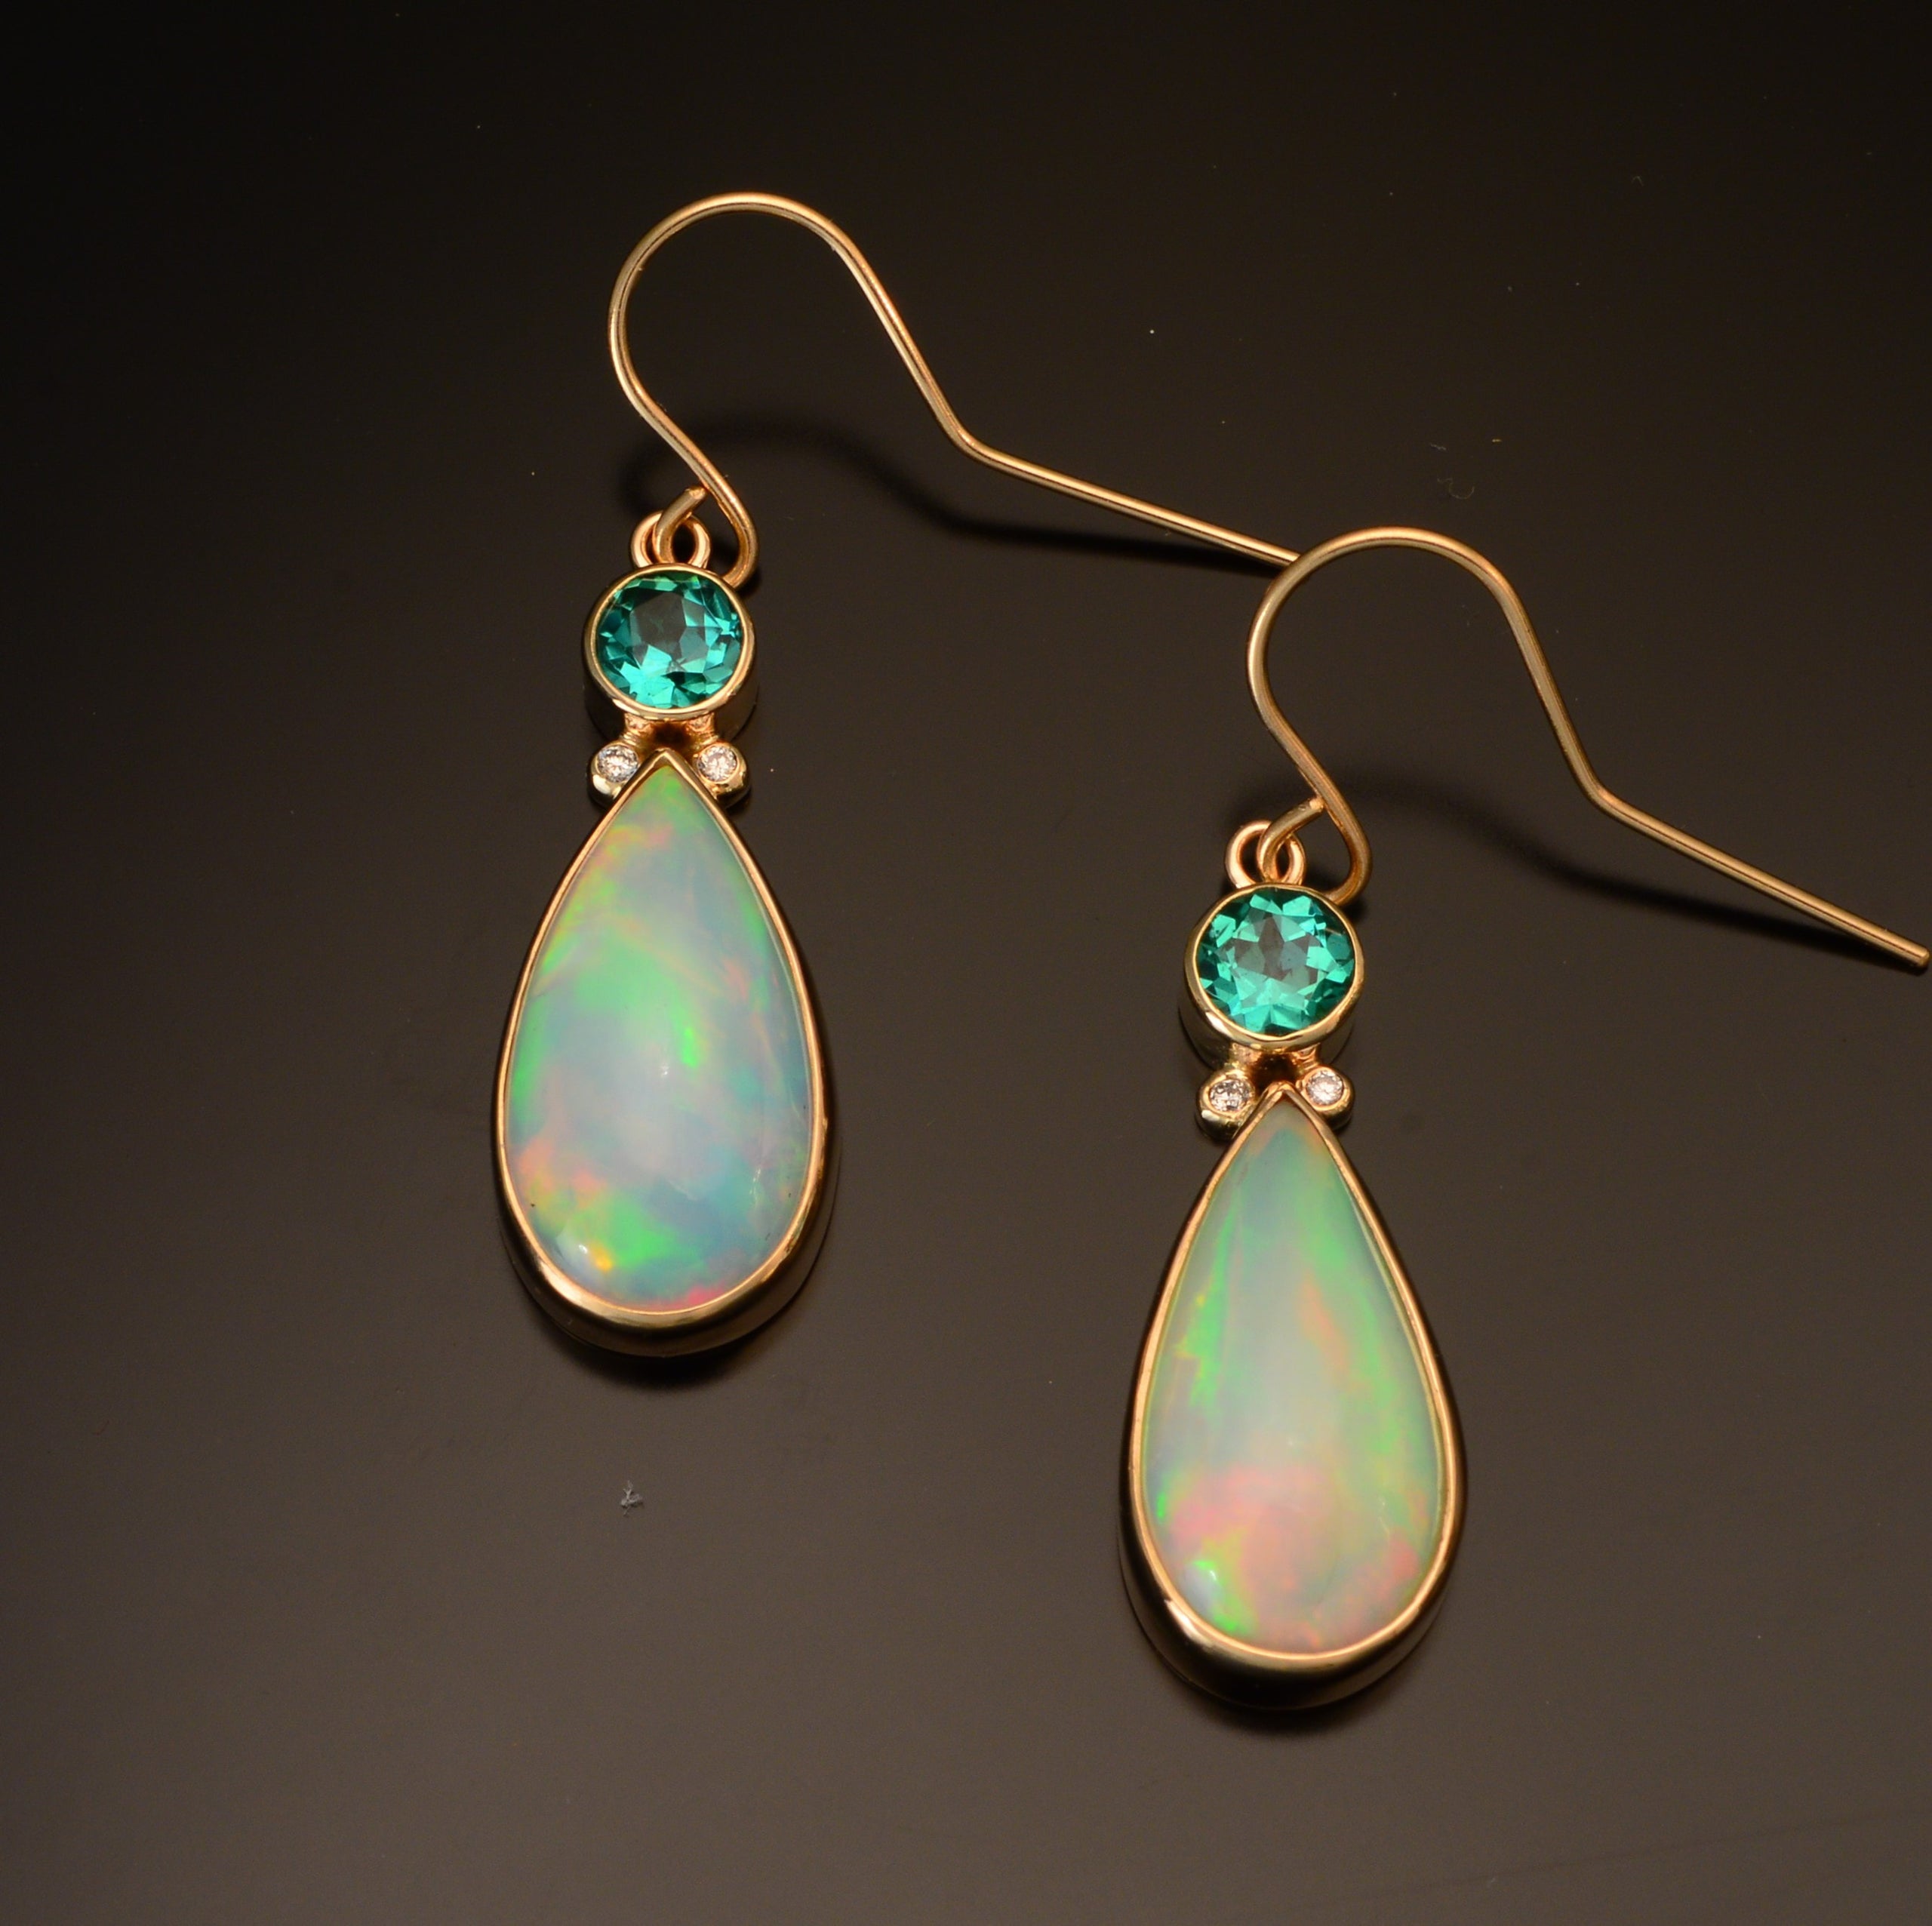 14K earrings pear shape Ethiopian Opal with round Tourmaline accents- WOW!